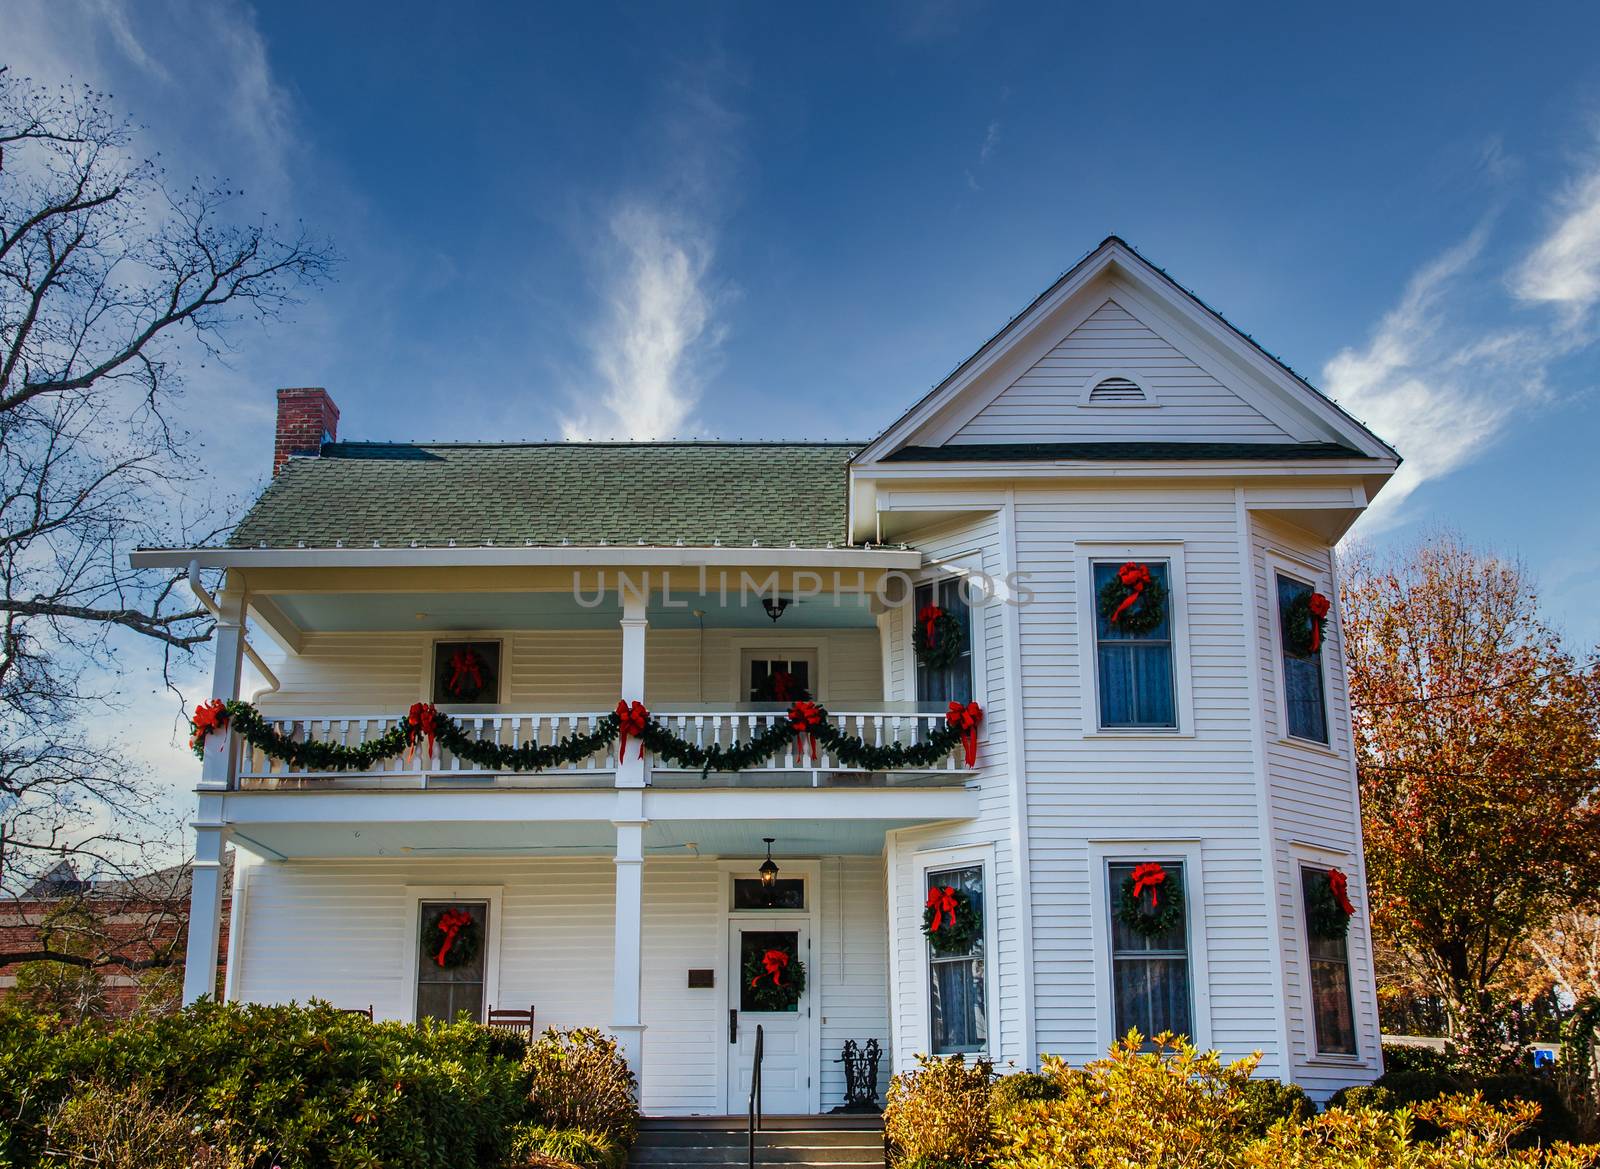 A traditional white two-story farm house decorated for Christmas